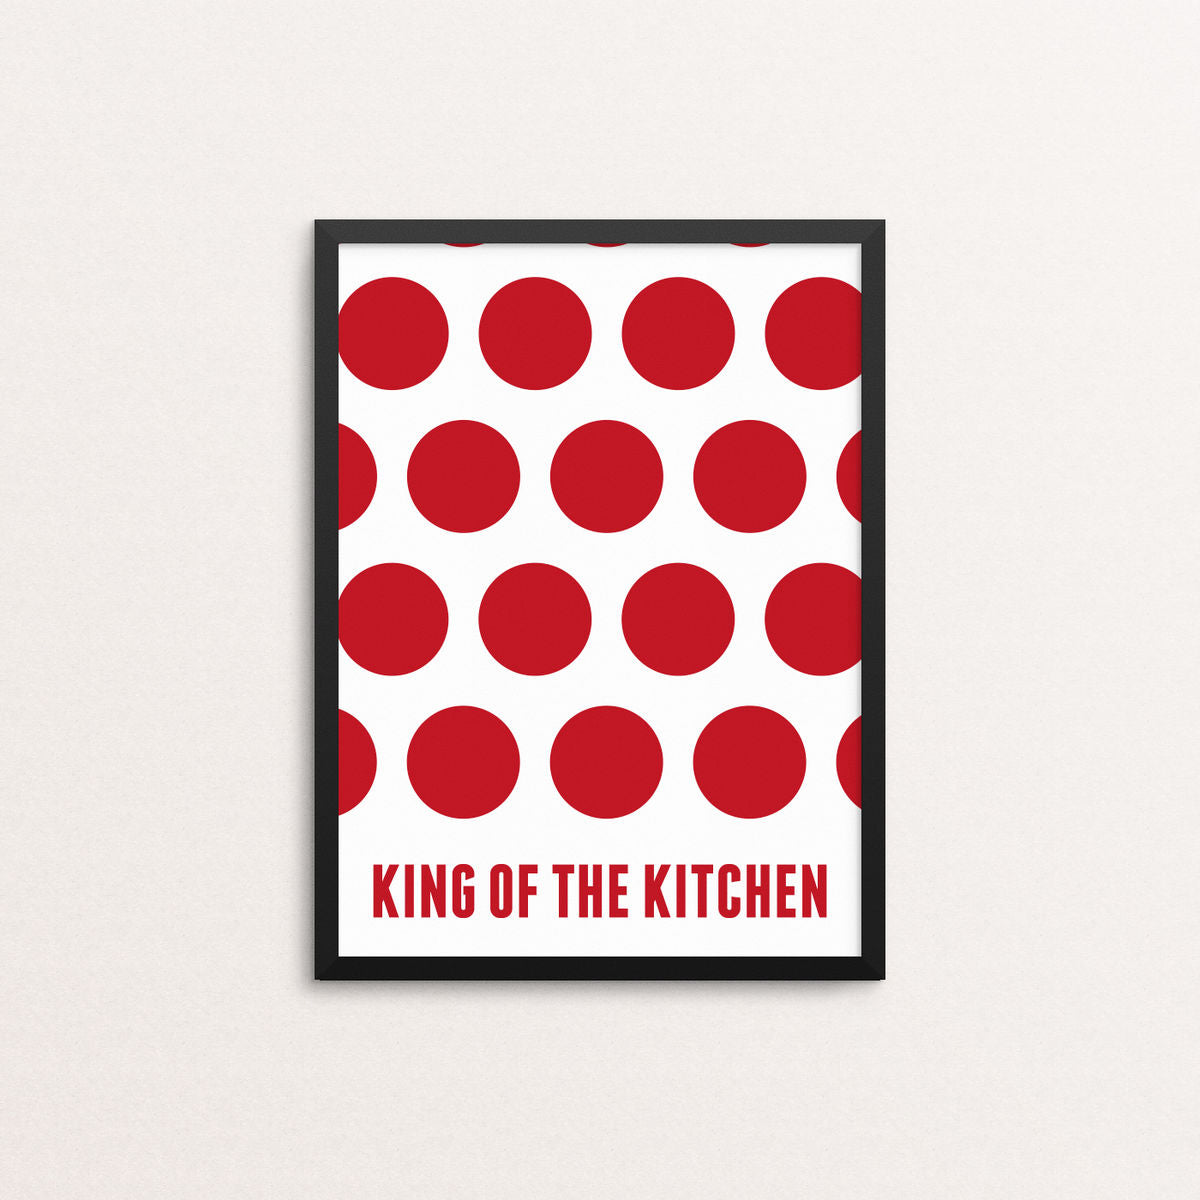 King of the Kitchen - Limited Edition Giclee Print